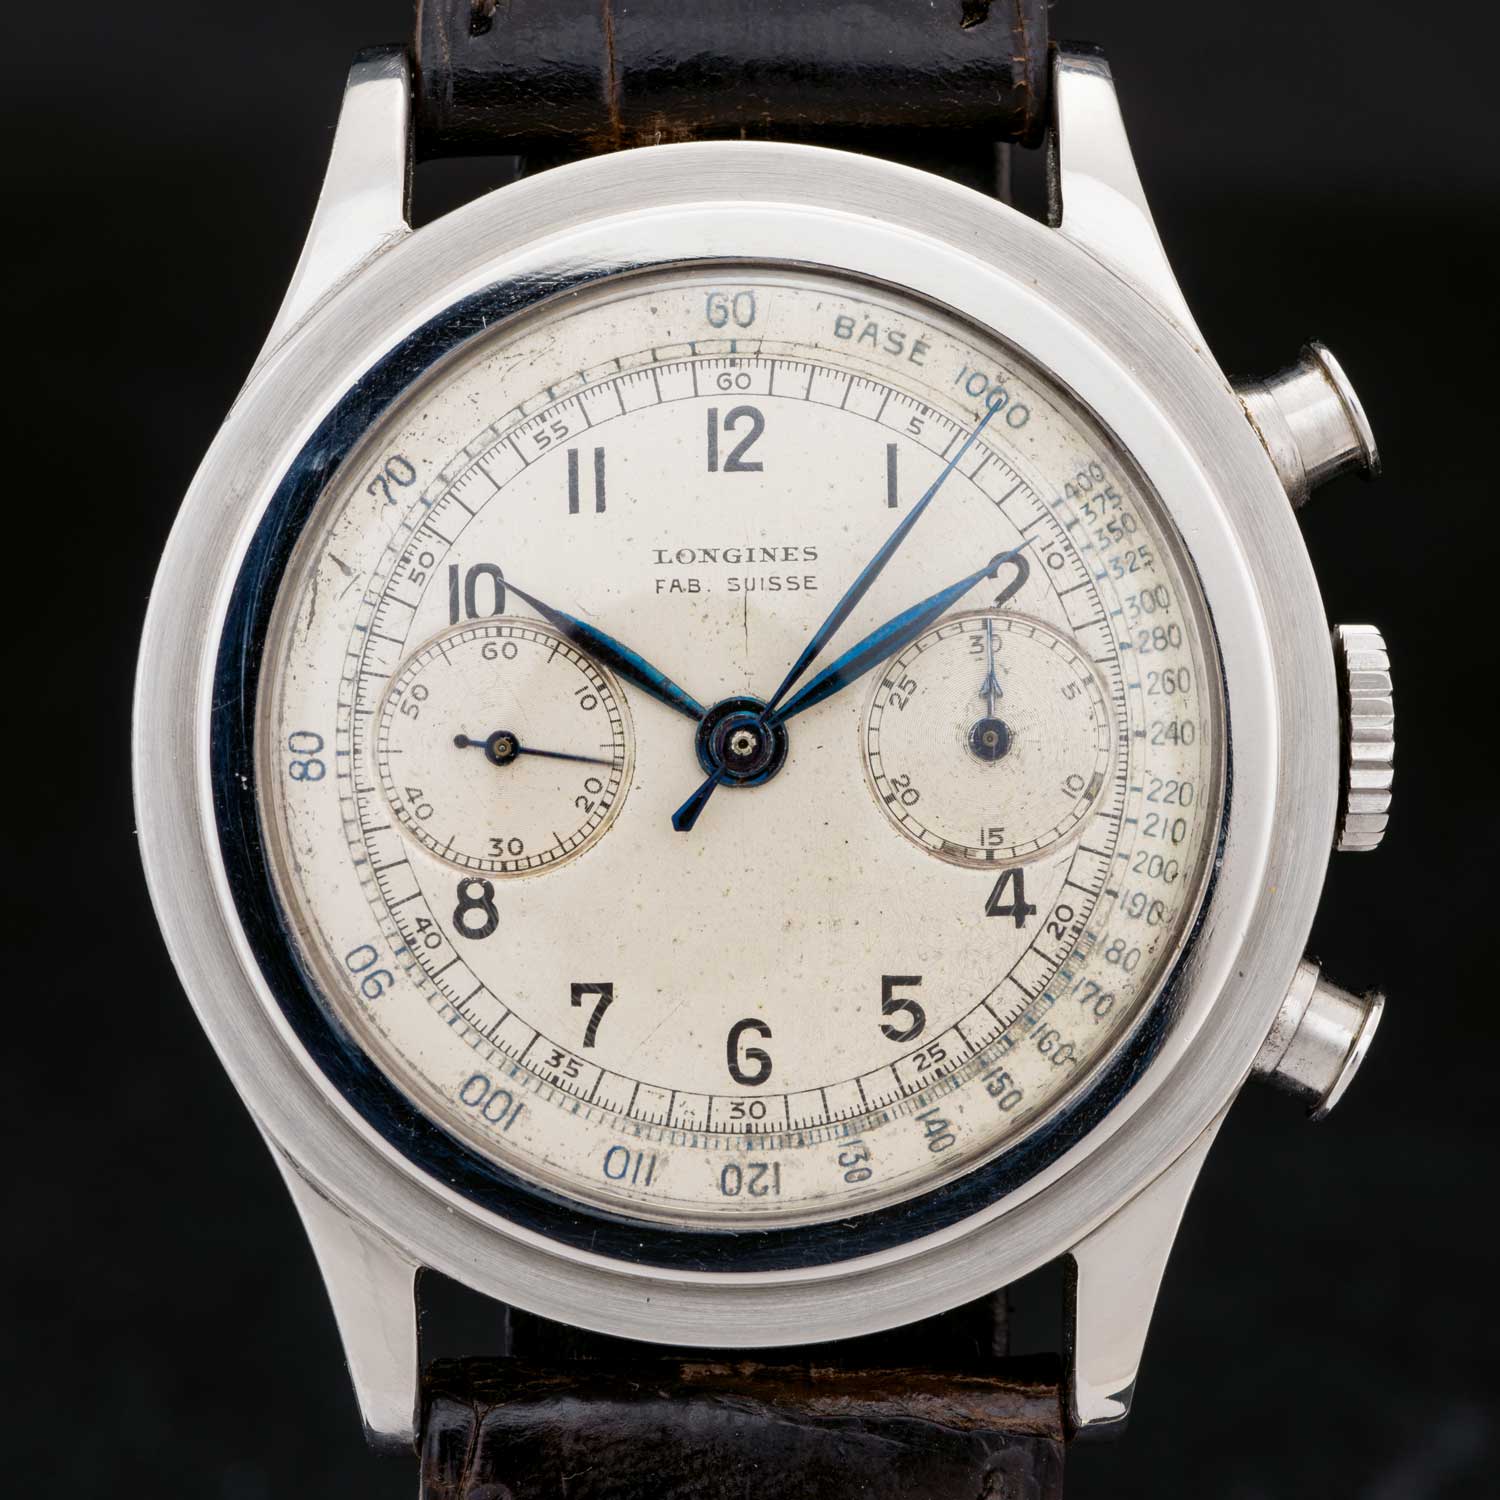 The original “Fab Suisse” dial is white with a tachymeter scale.